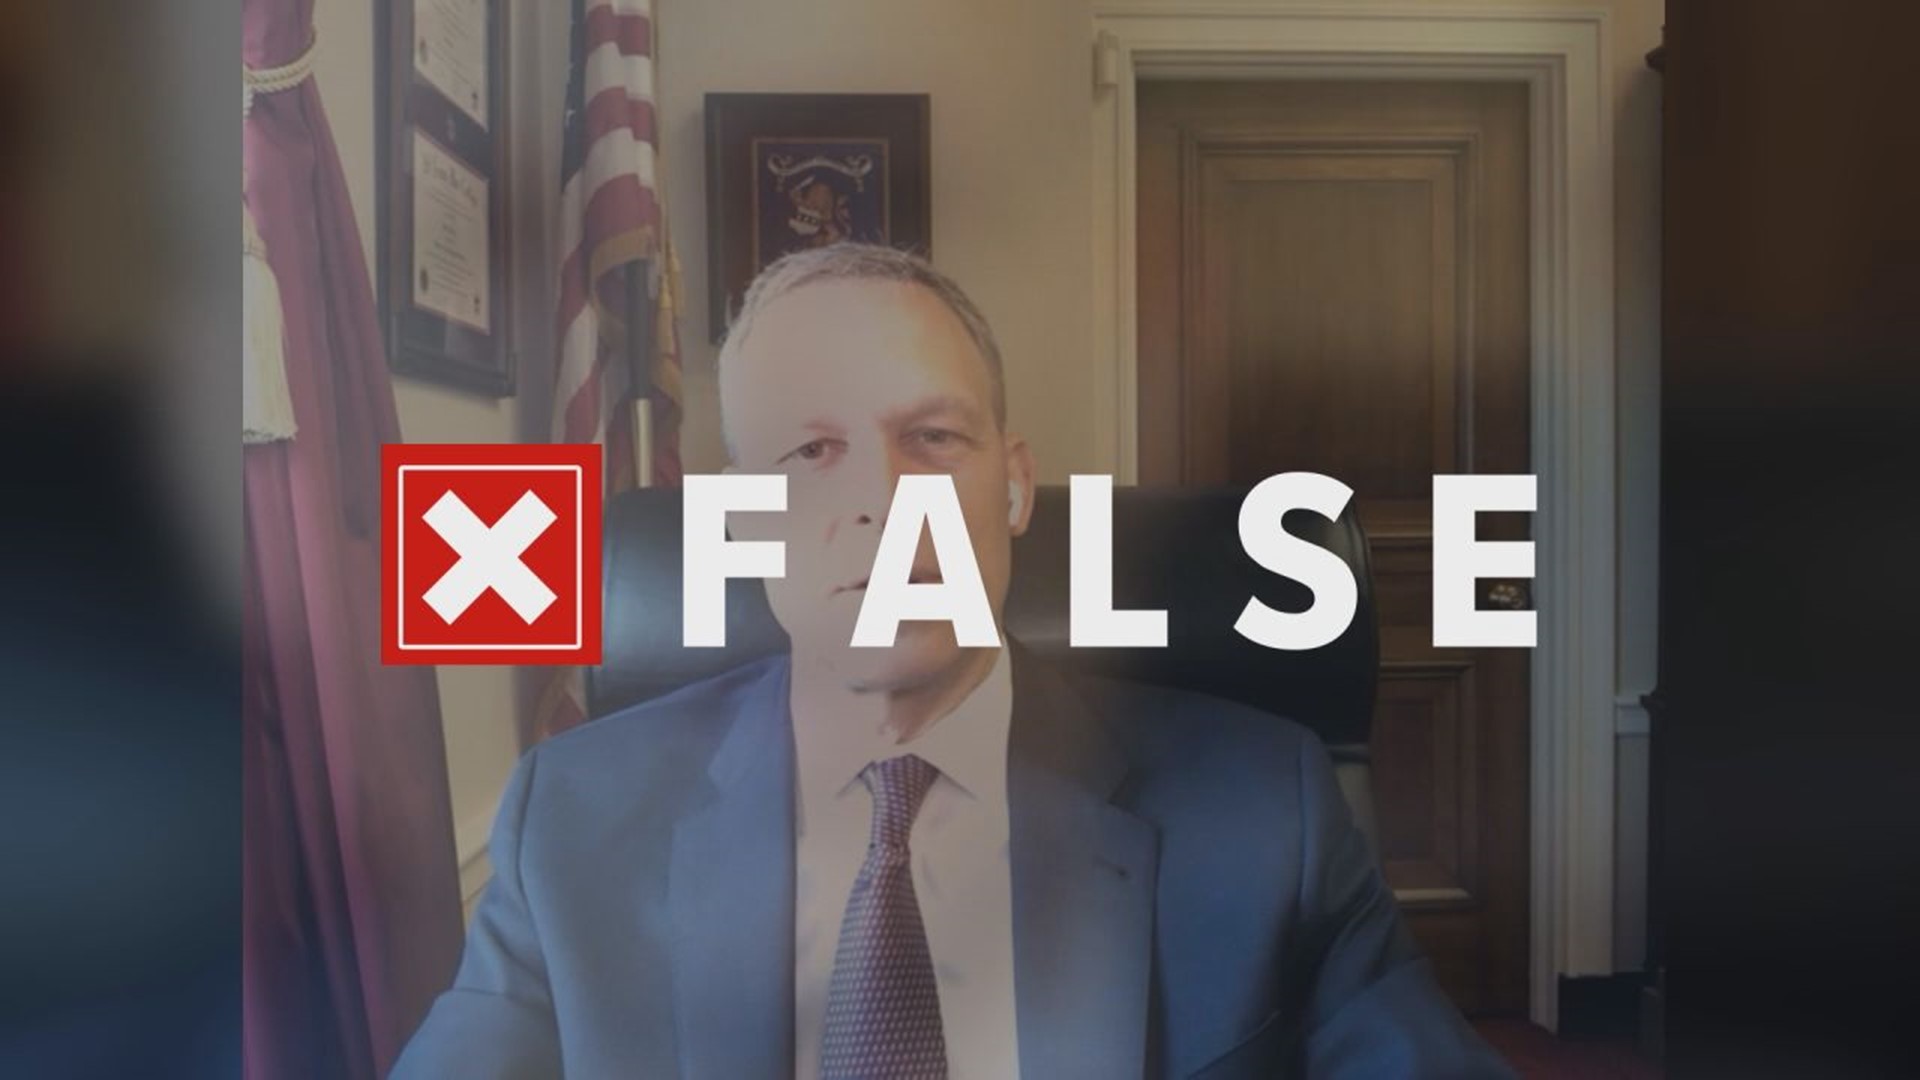 Earlier this week, Rep. Scott Perry was on FOX43 Capitol Beat. We fact checked some of Perry's claims.